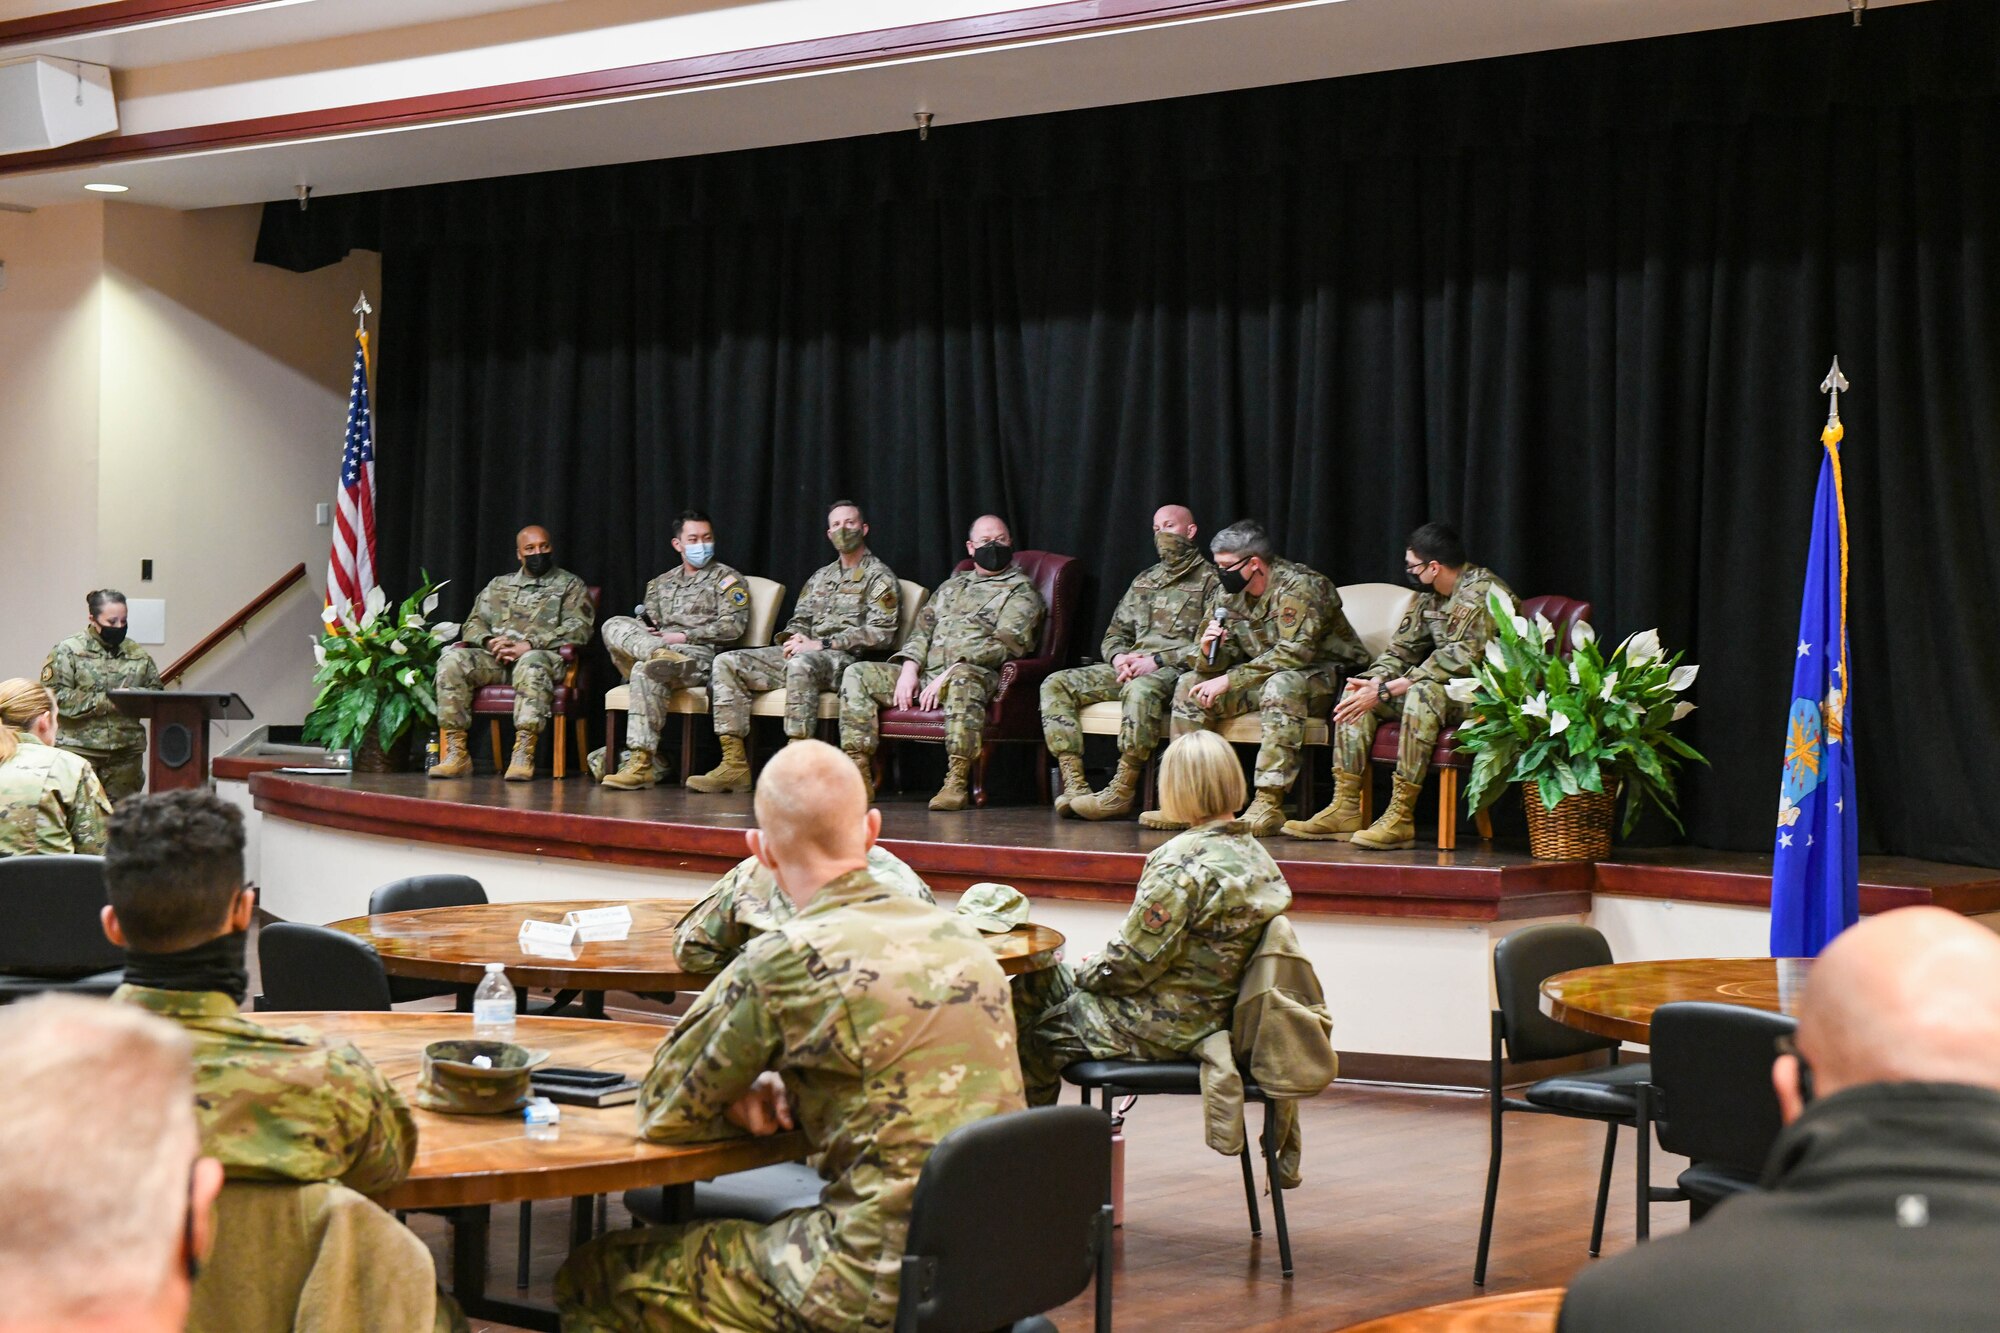 Airmen talk on stage while others listen